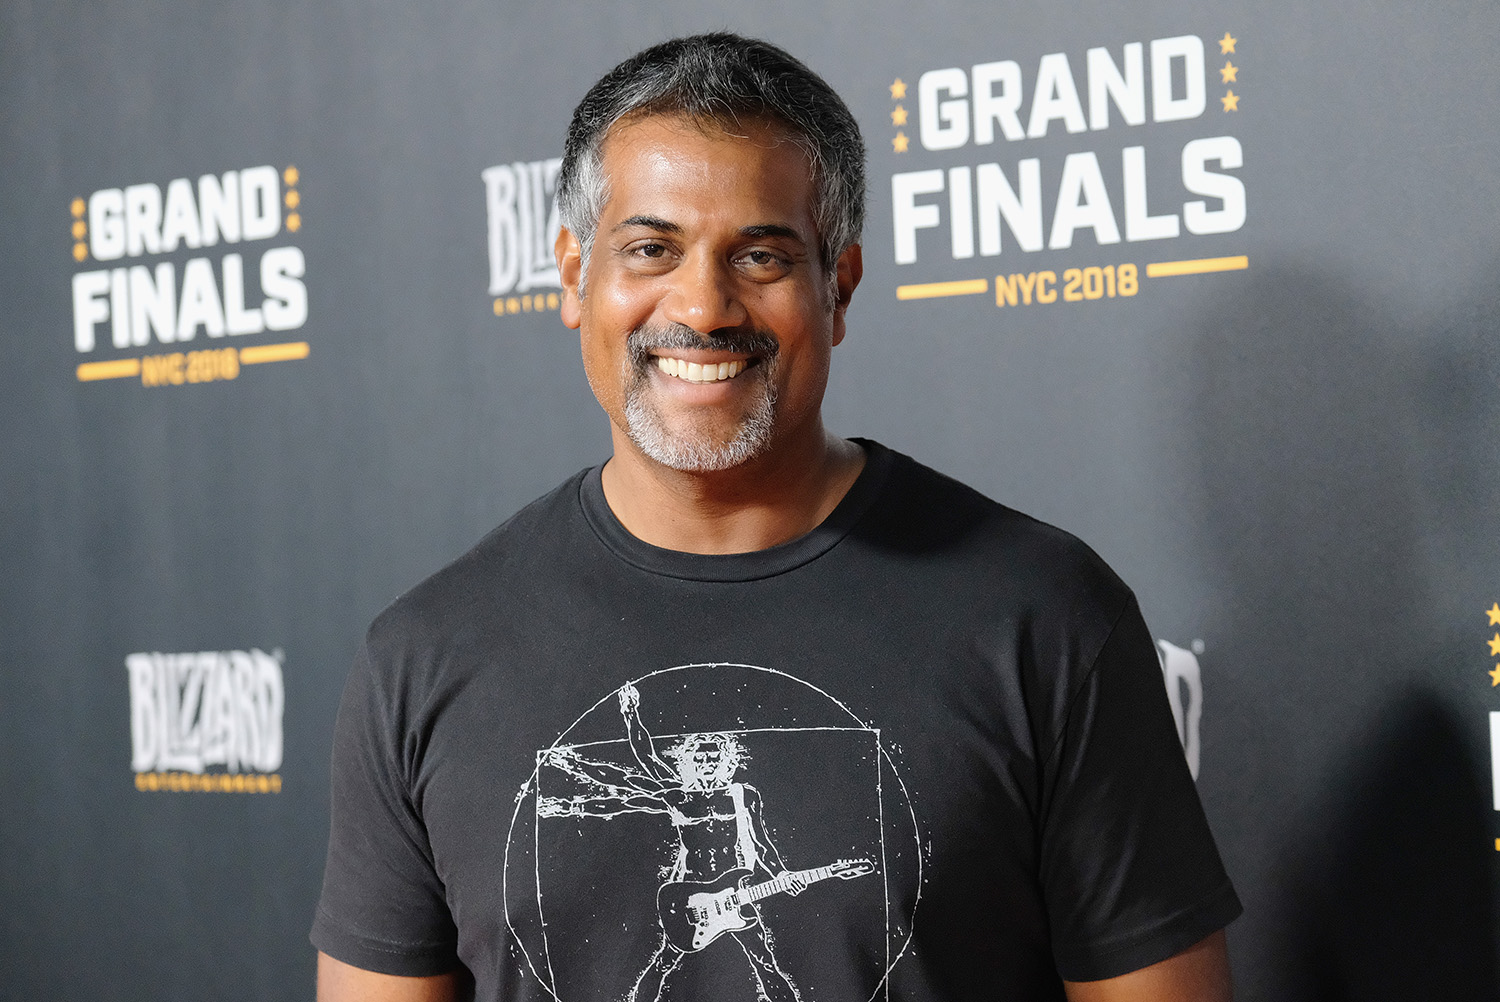 Former Overwatch Executive Producer Chacko Sonny at Blizzard Entertainment's Overwatch League Grand Finals in 2018